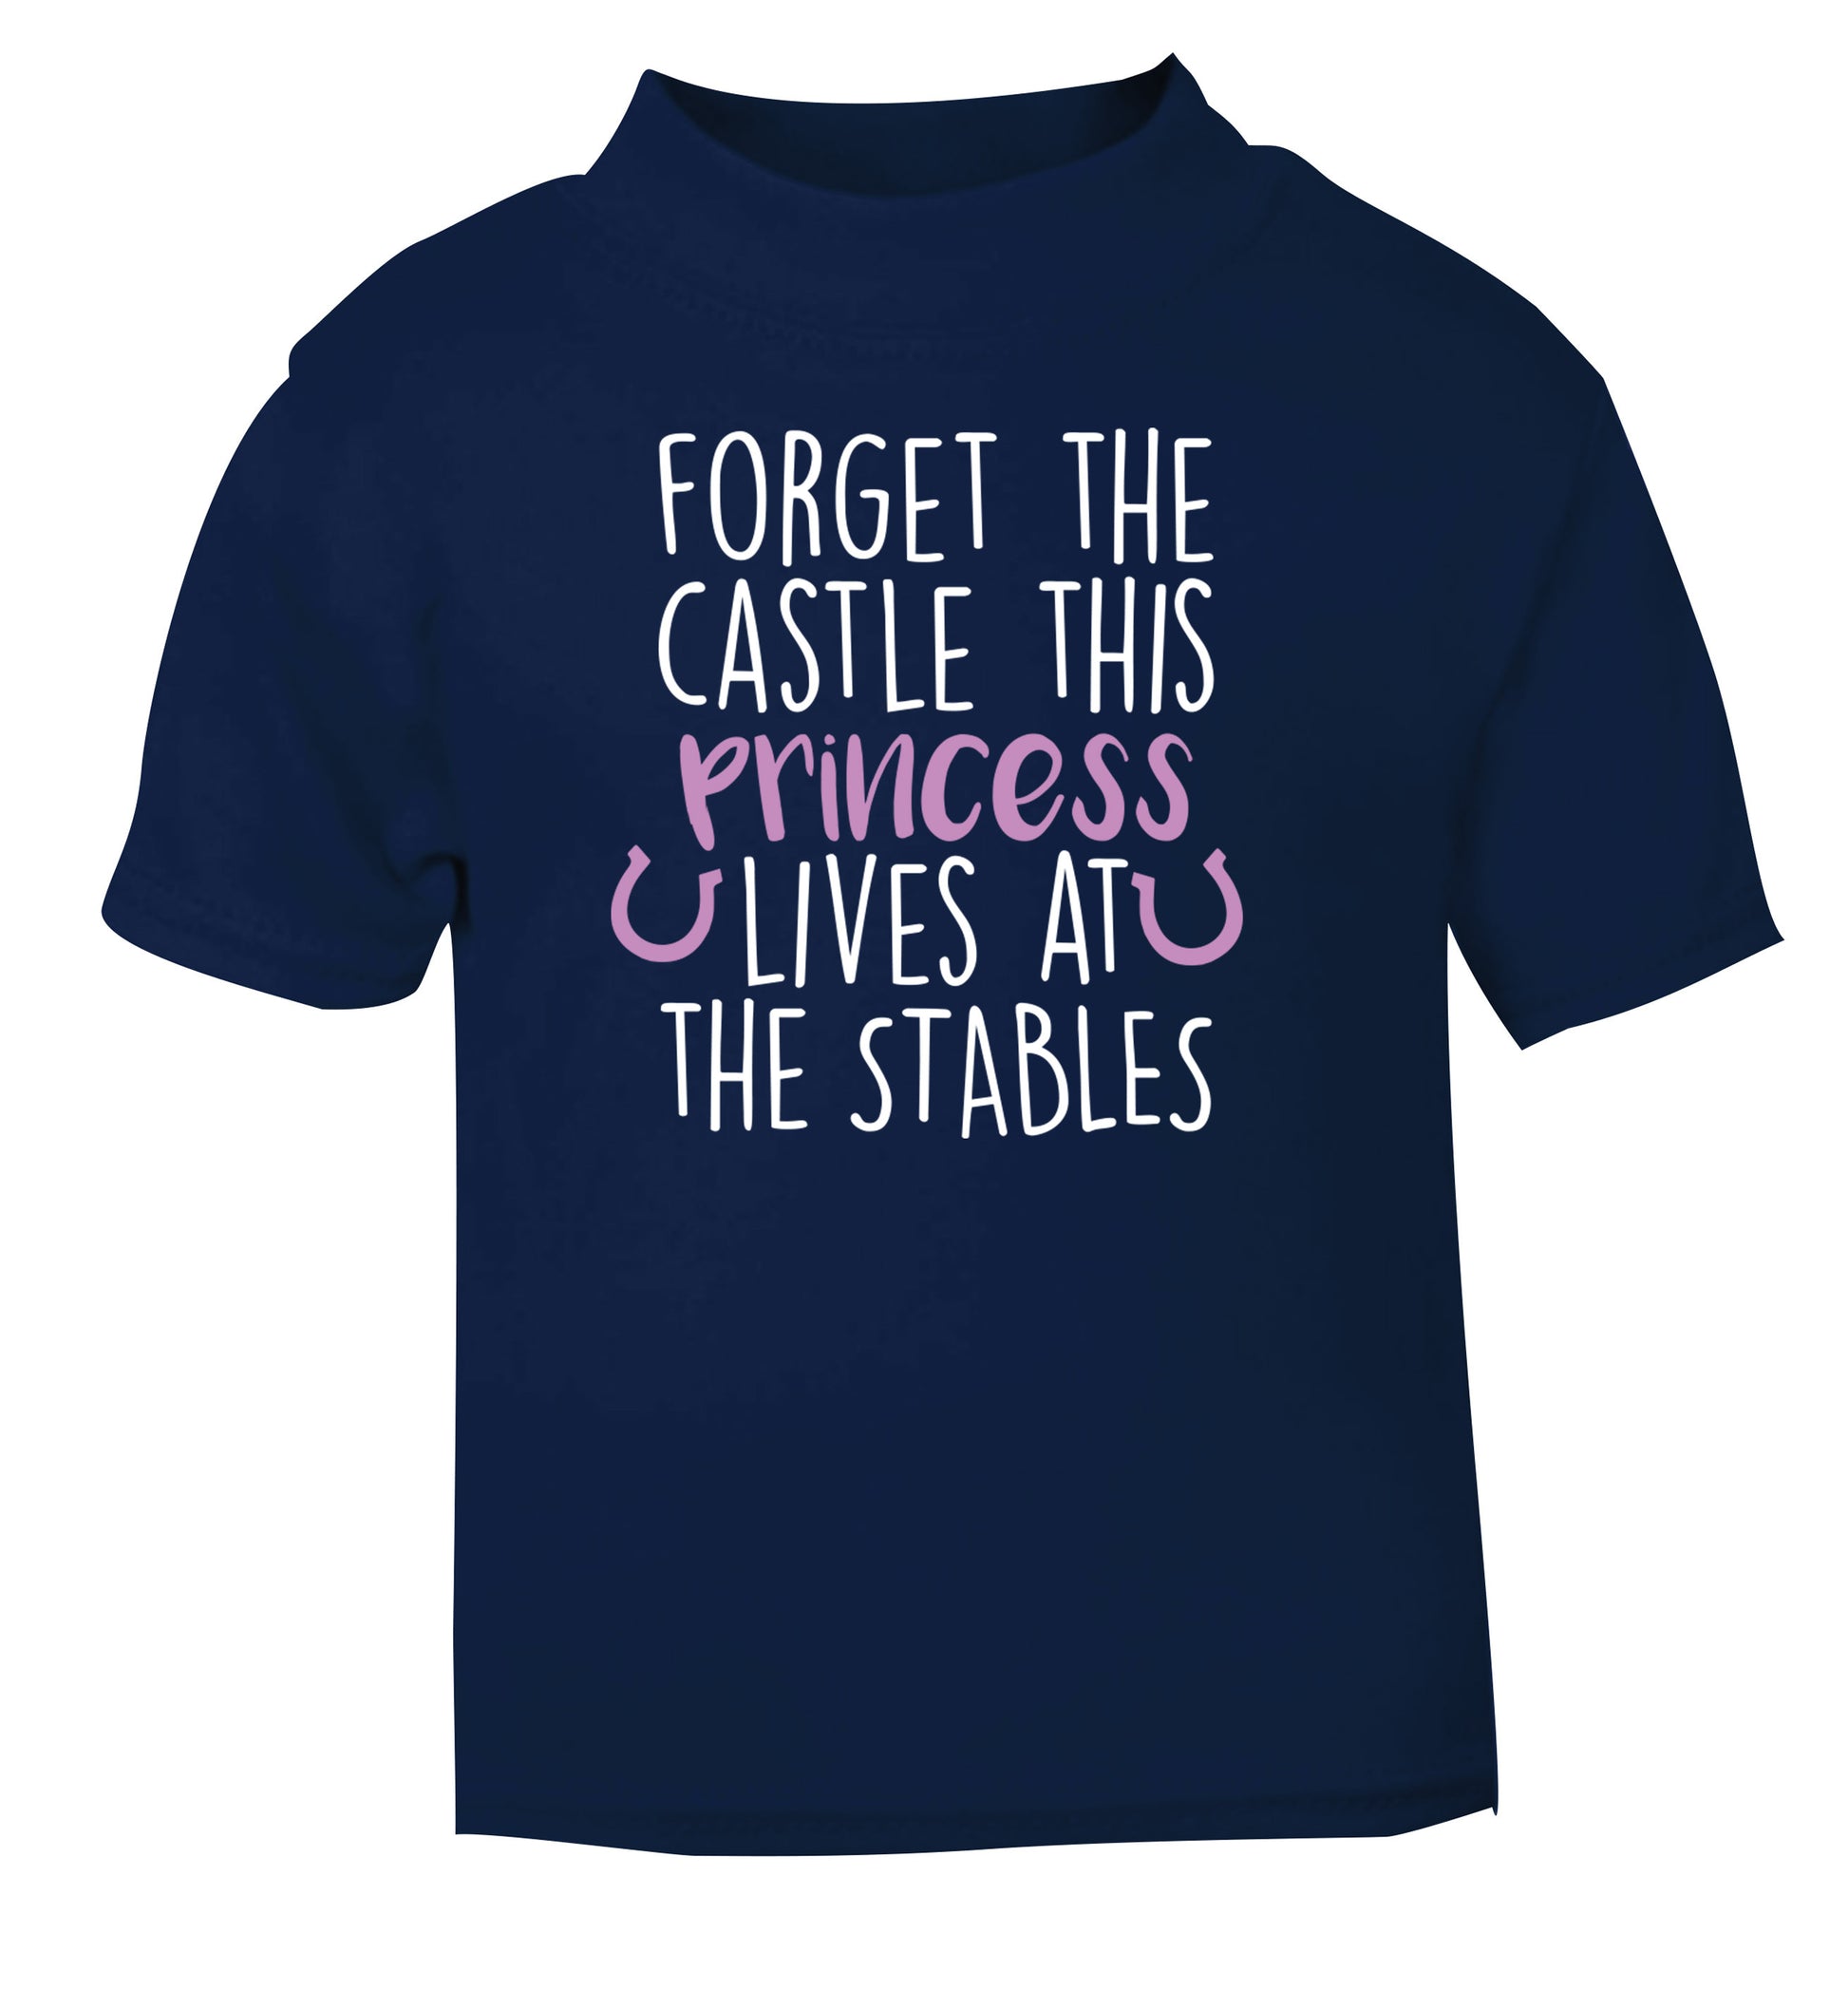 Forget the castle this princess lives at the stables navy Baby Toddler Tshirt 2 Years